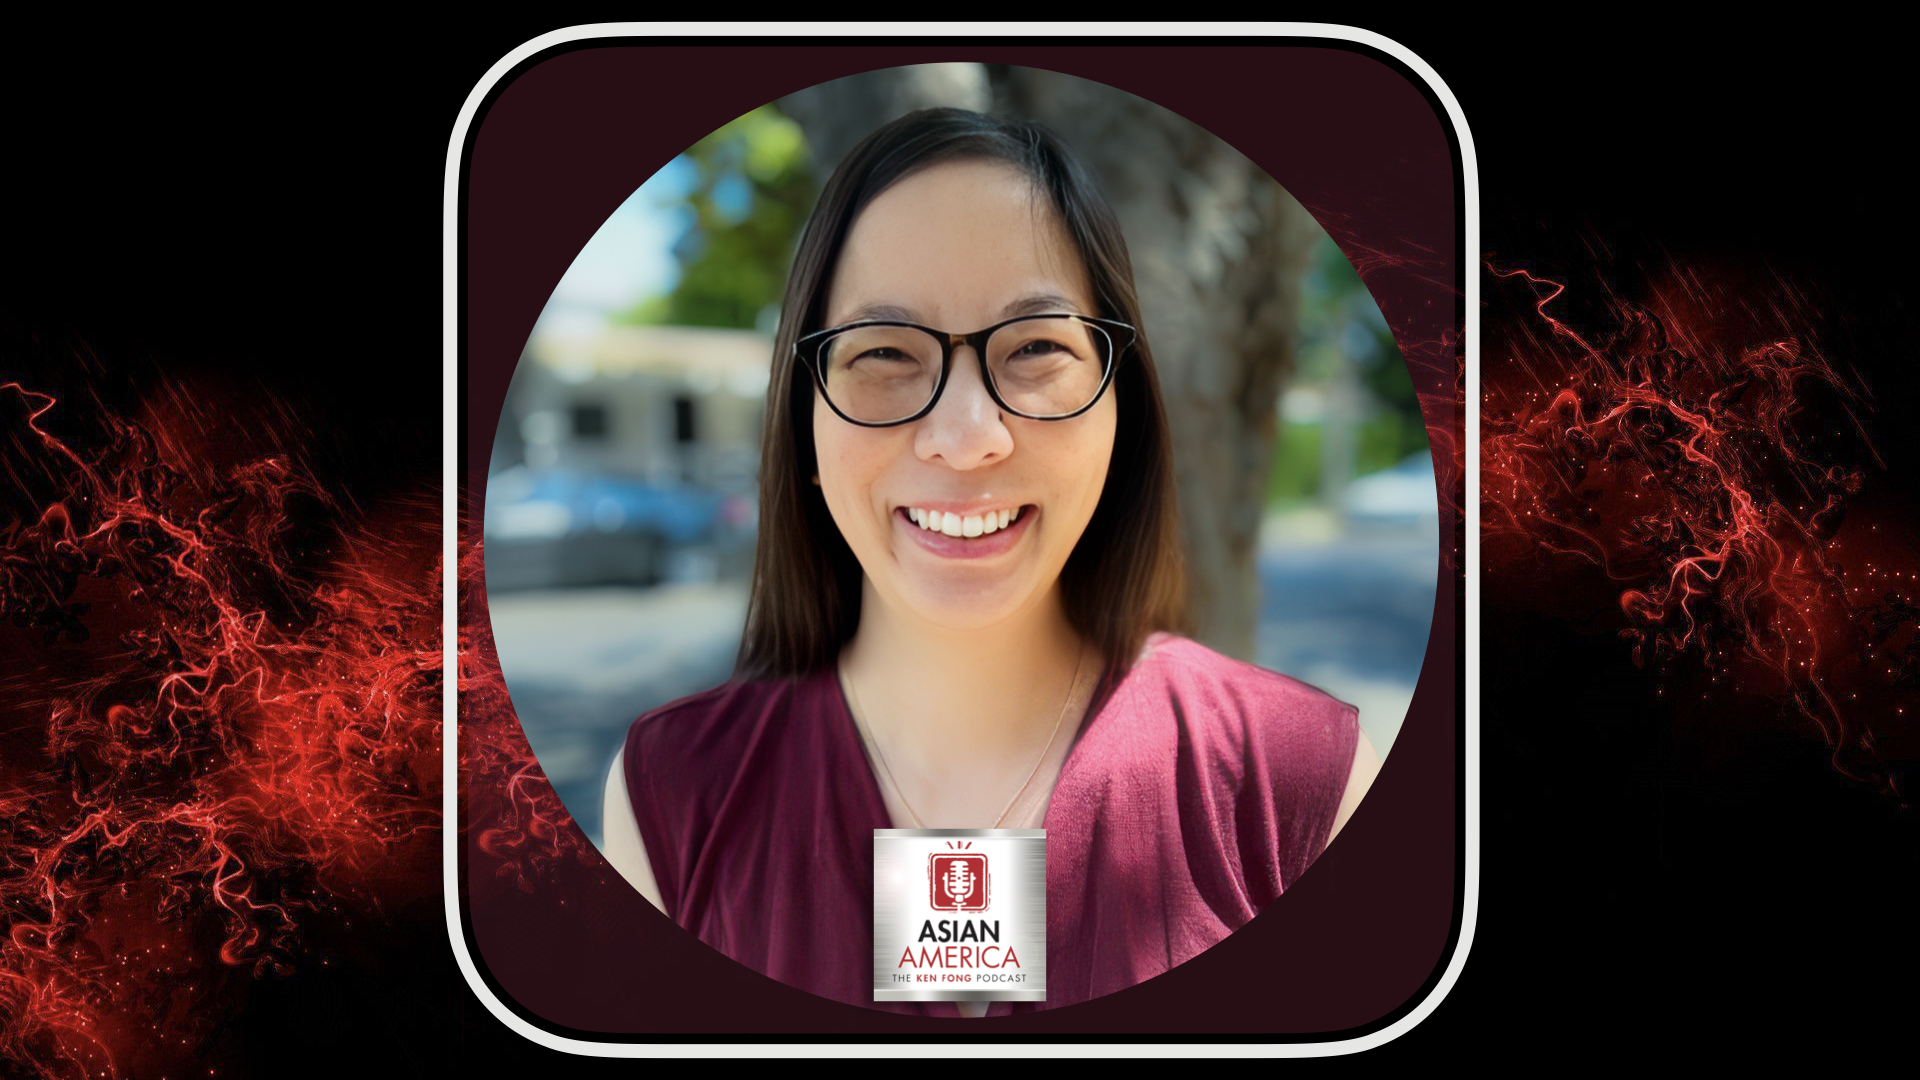 EP 486: Dr. Kelly N. Fong On Confronting Racism & Sexism In Higher Education